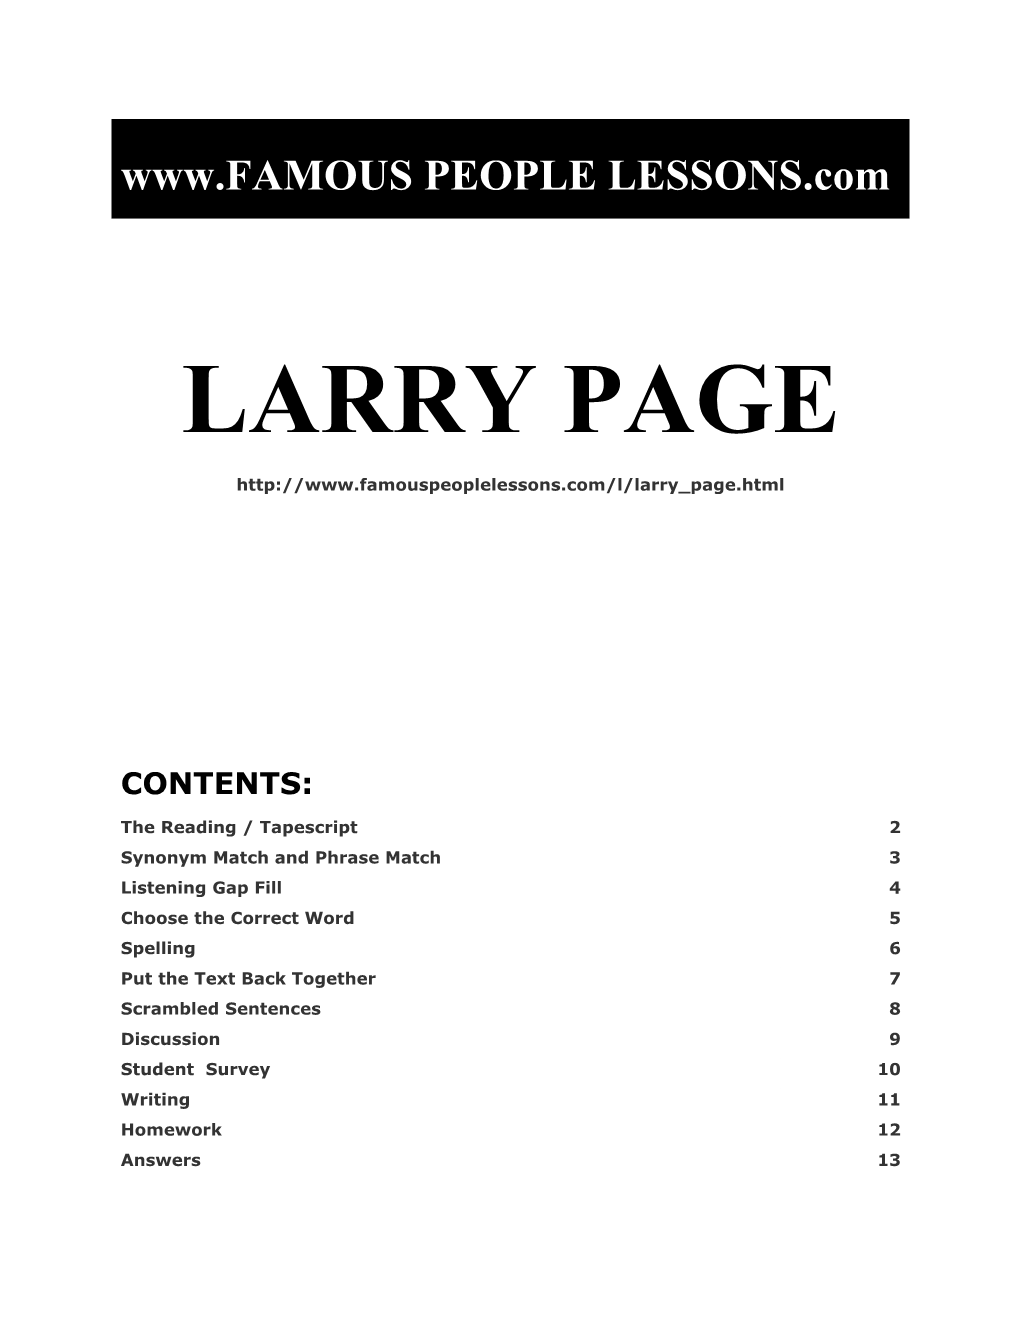 Famous People Lessons - Larry Page